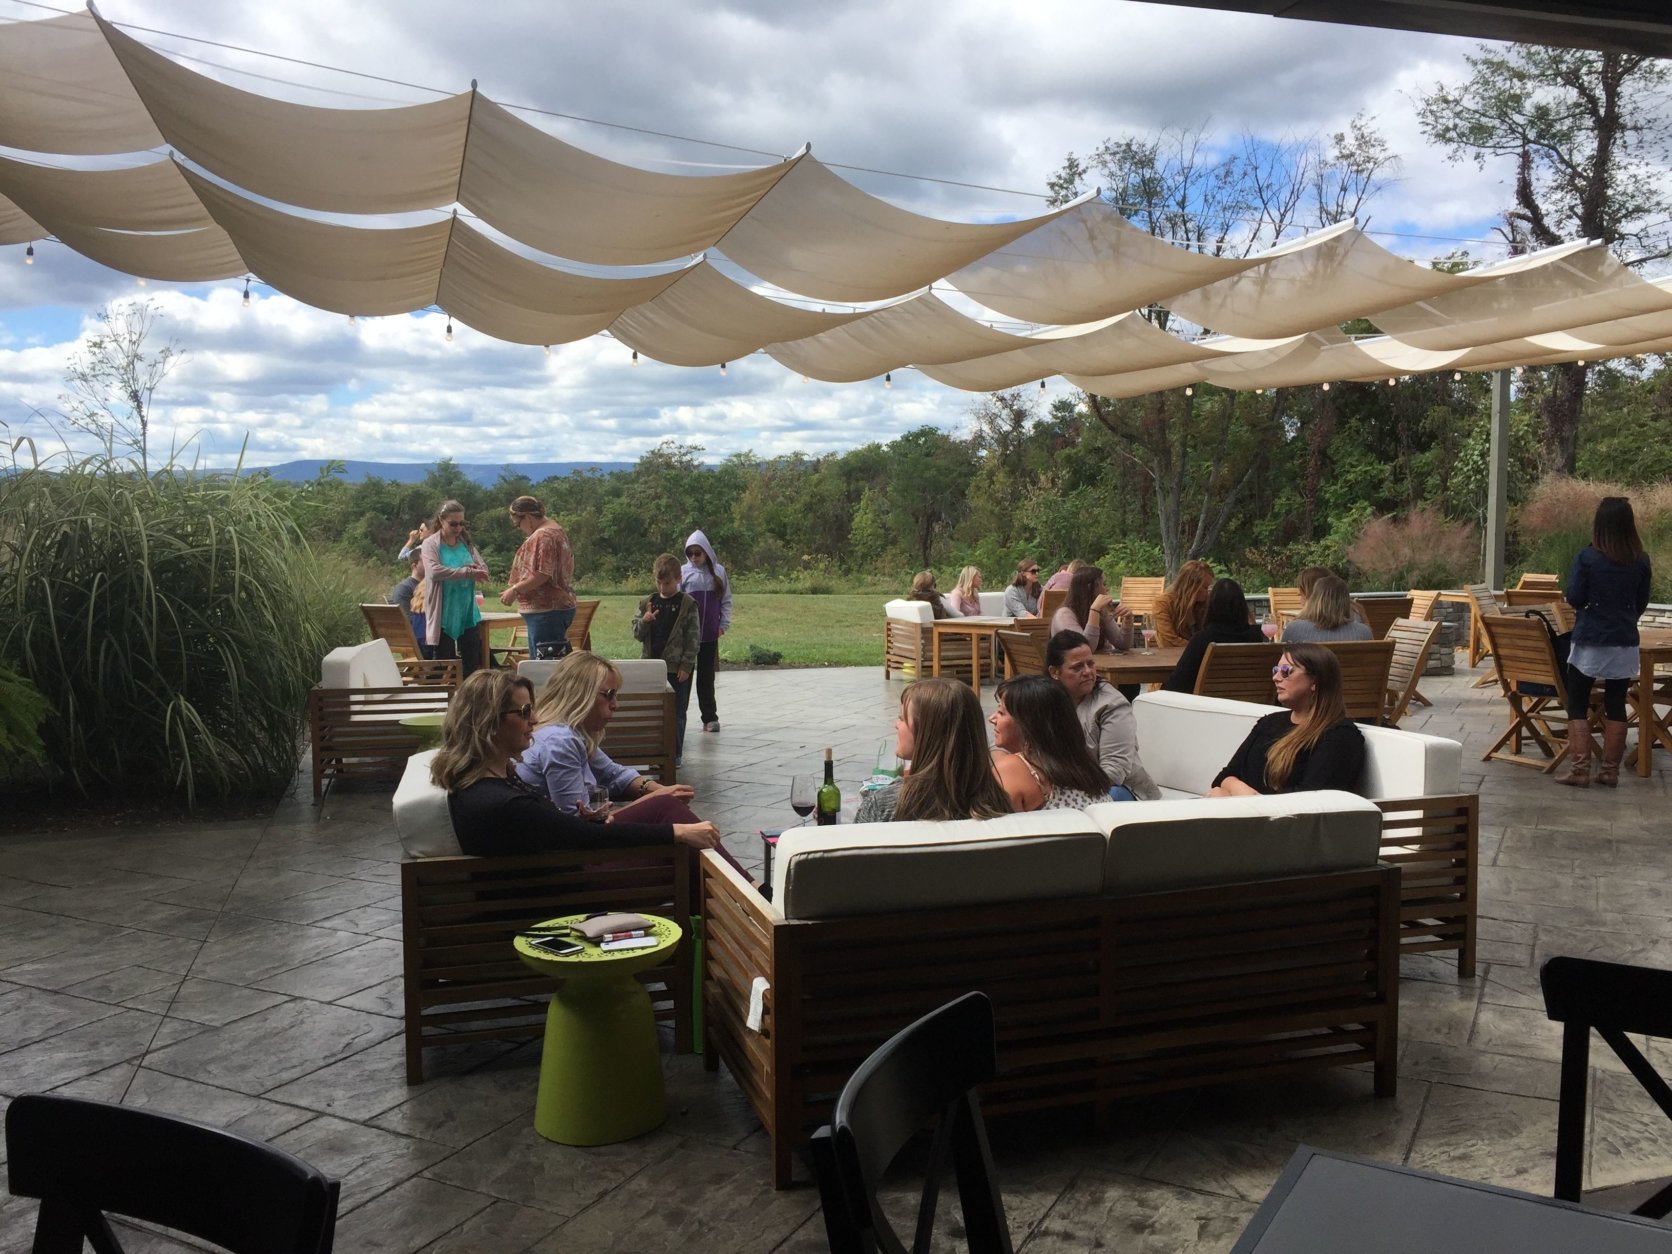 This Sept. 30, 2017 photo shows wine tasters relaxing on the patio at the James Charles Winery &amp; Vineyard in Winchester, Va. Thomas Jefferson may have been Virginia's first winemaker but it took another 200 years for the industry to blossom in the state. Today with 300 wineries, Virginia is the country's fifth-largest wine region. (AP Photo/Sally Carpenter Hale)